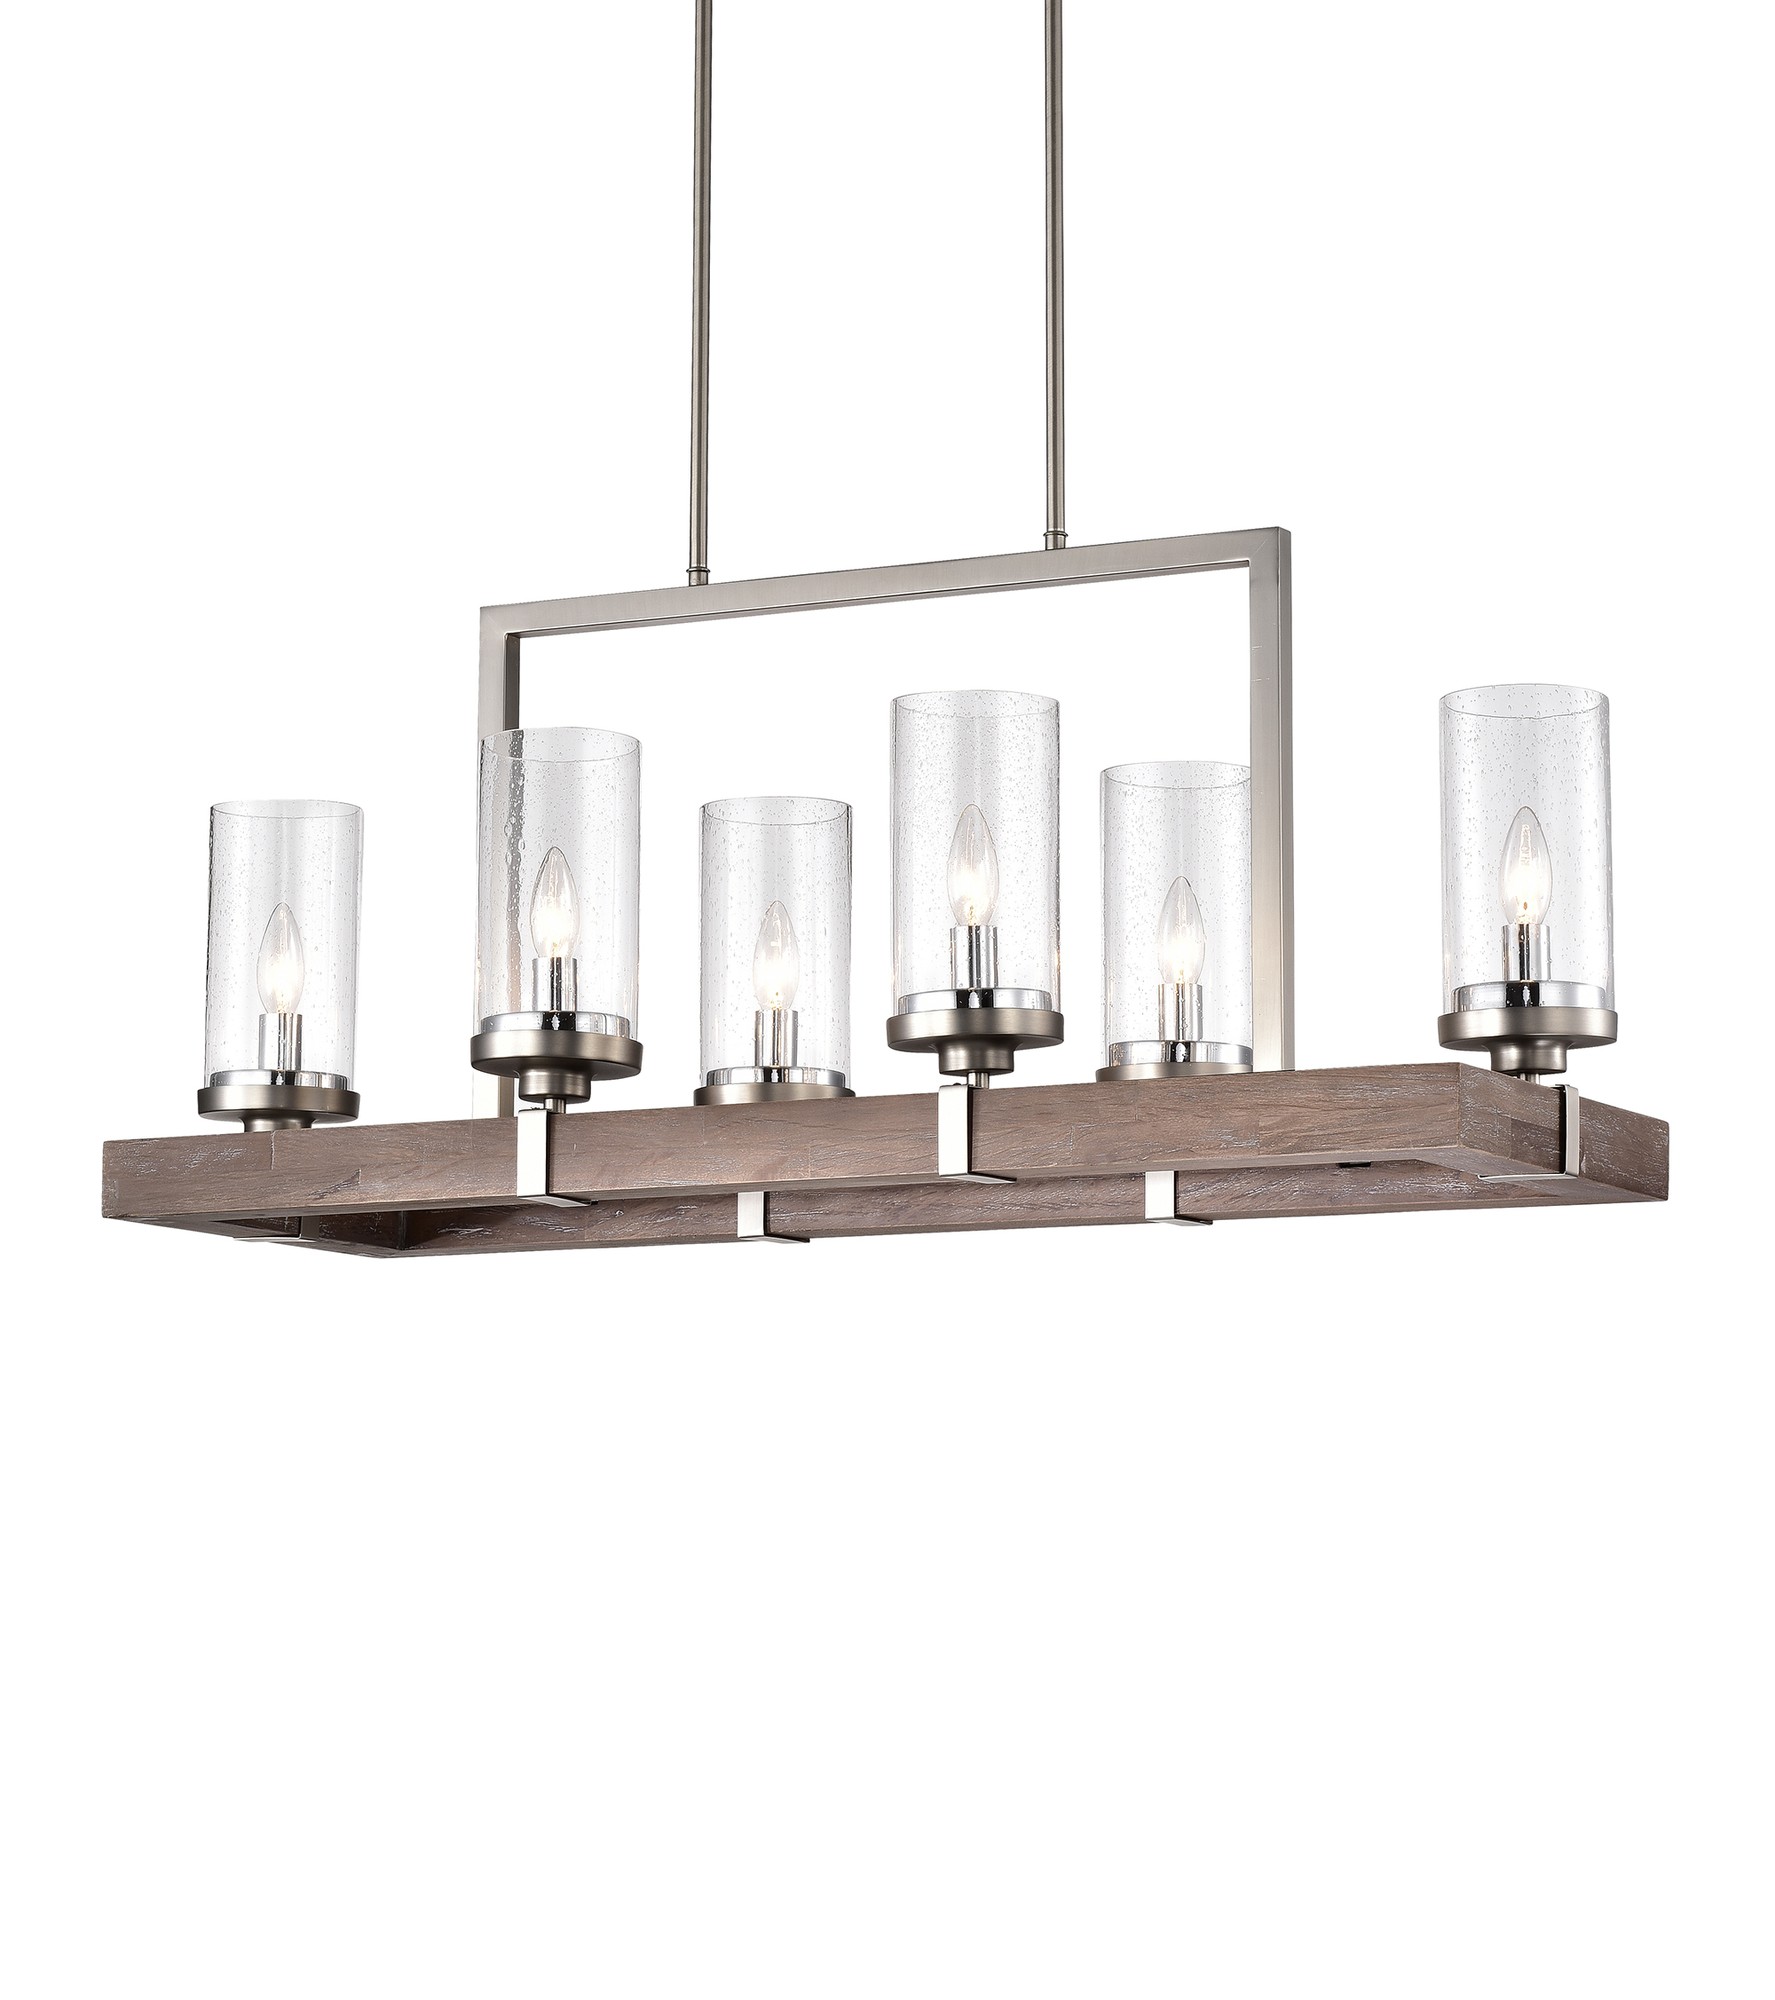 Sonoma Wood & Metal 6-Light Linear Chandelier with Seeded Glass Shades